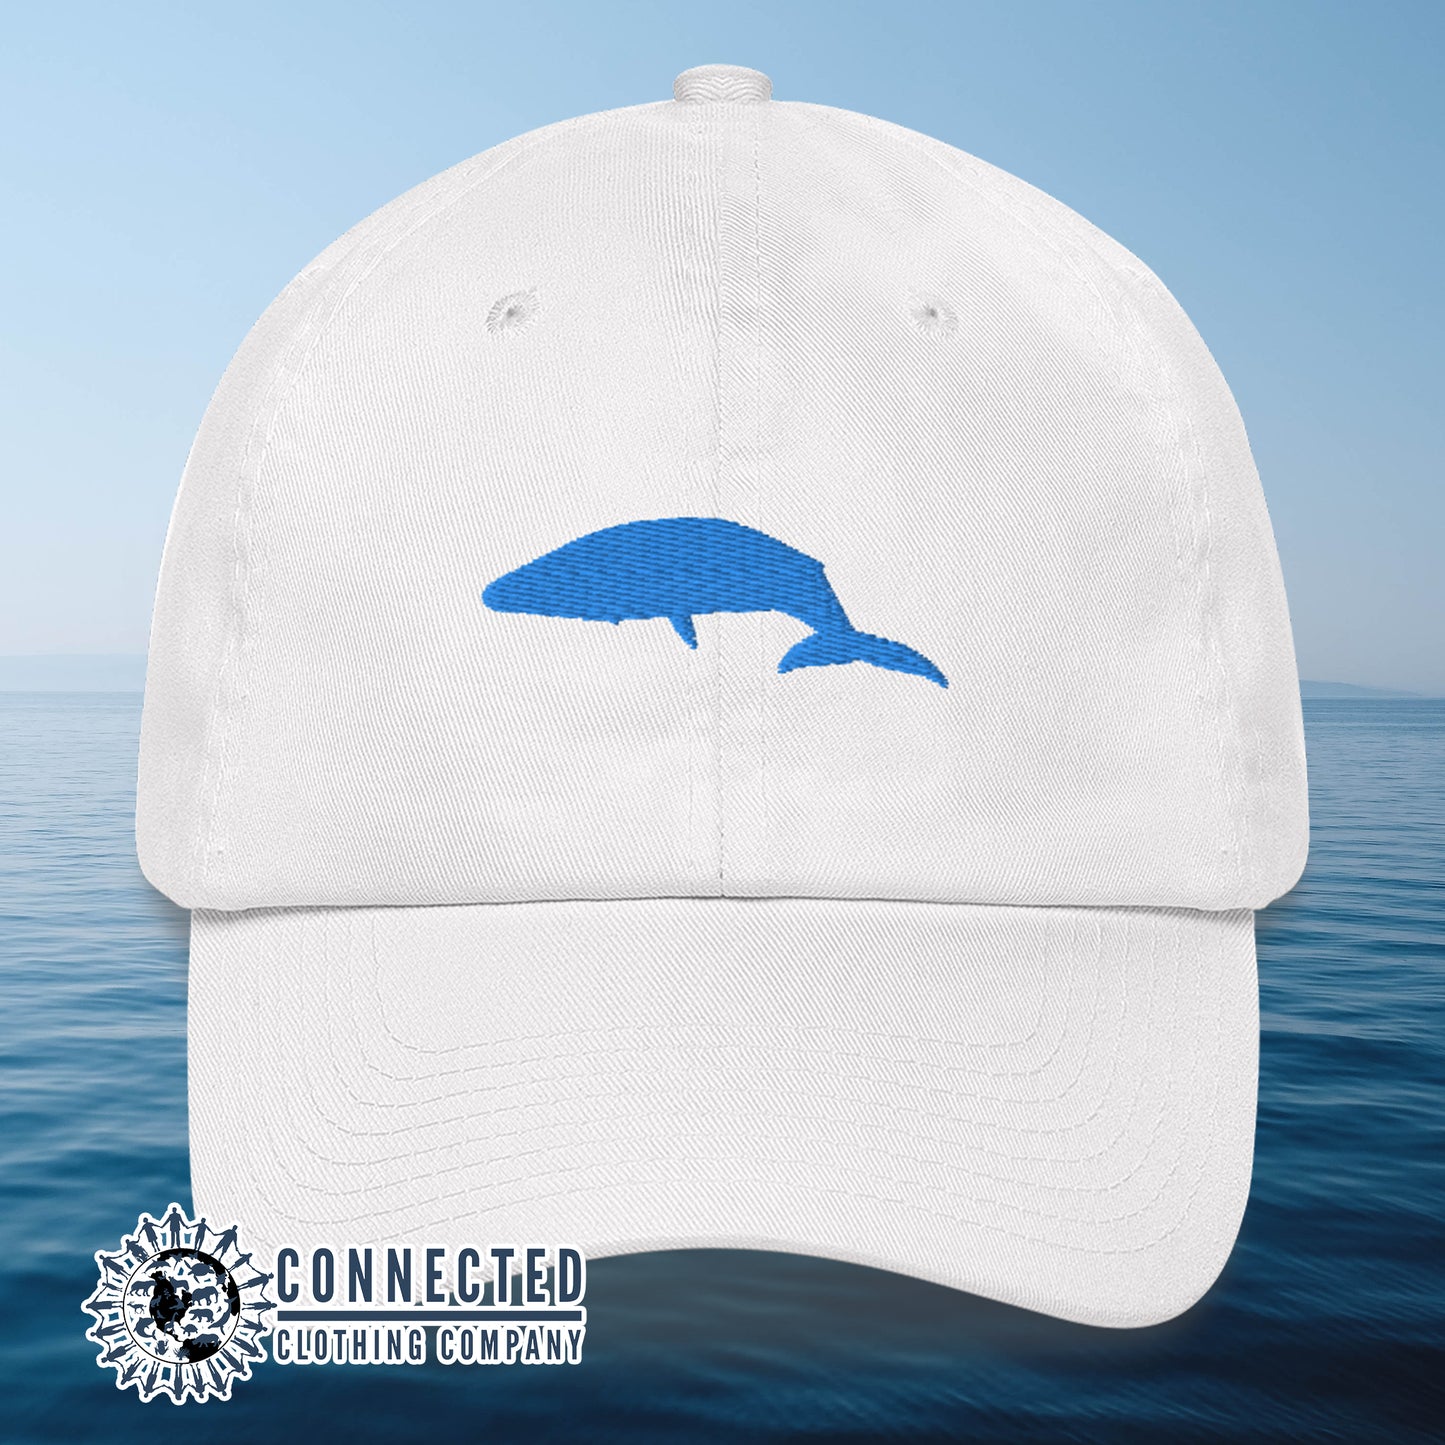 White Blue Whale Cotton Cap - Connected Clothing Company - 10% of profits donated to Mission Blue ocean conservation